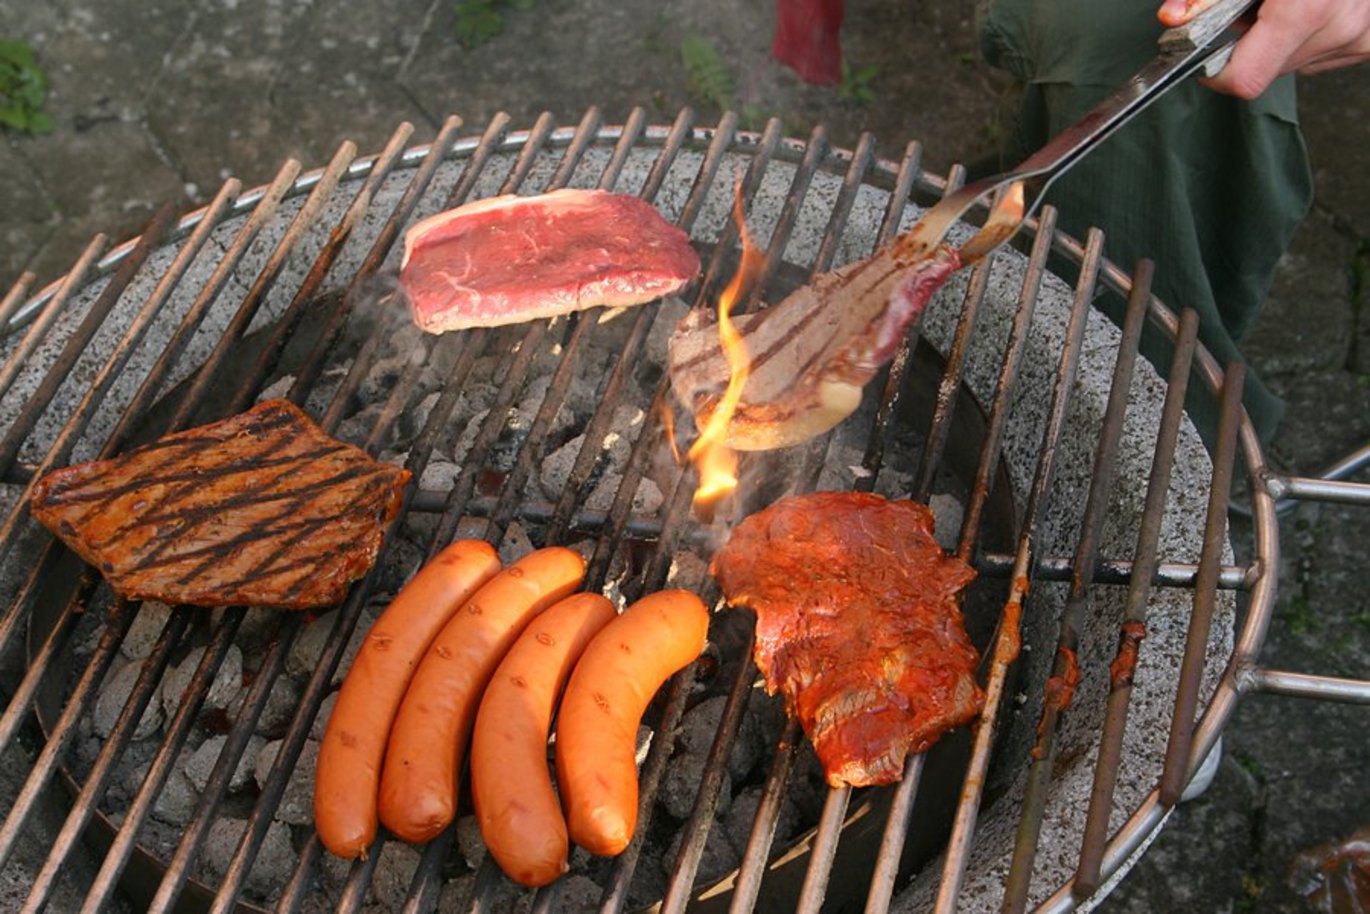 The meat-consumption in Denmark is among the highest in the world.